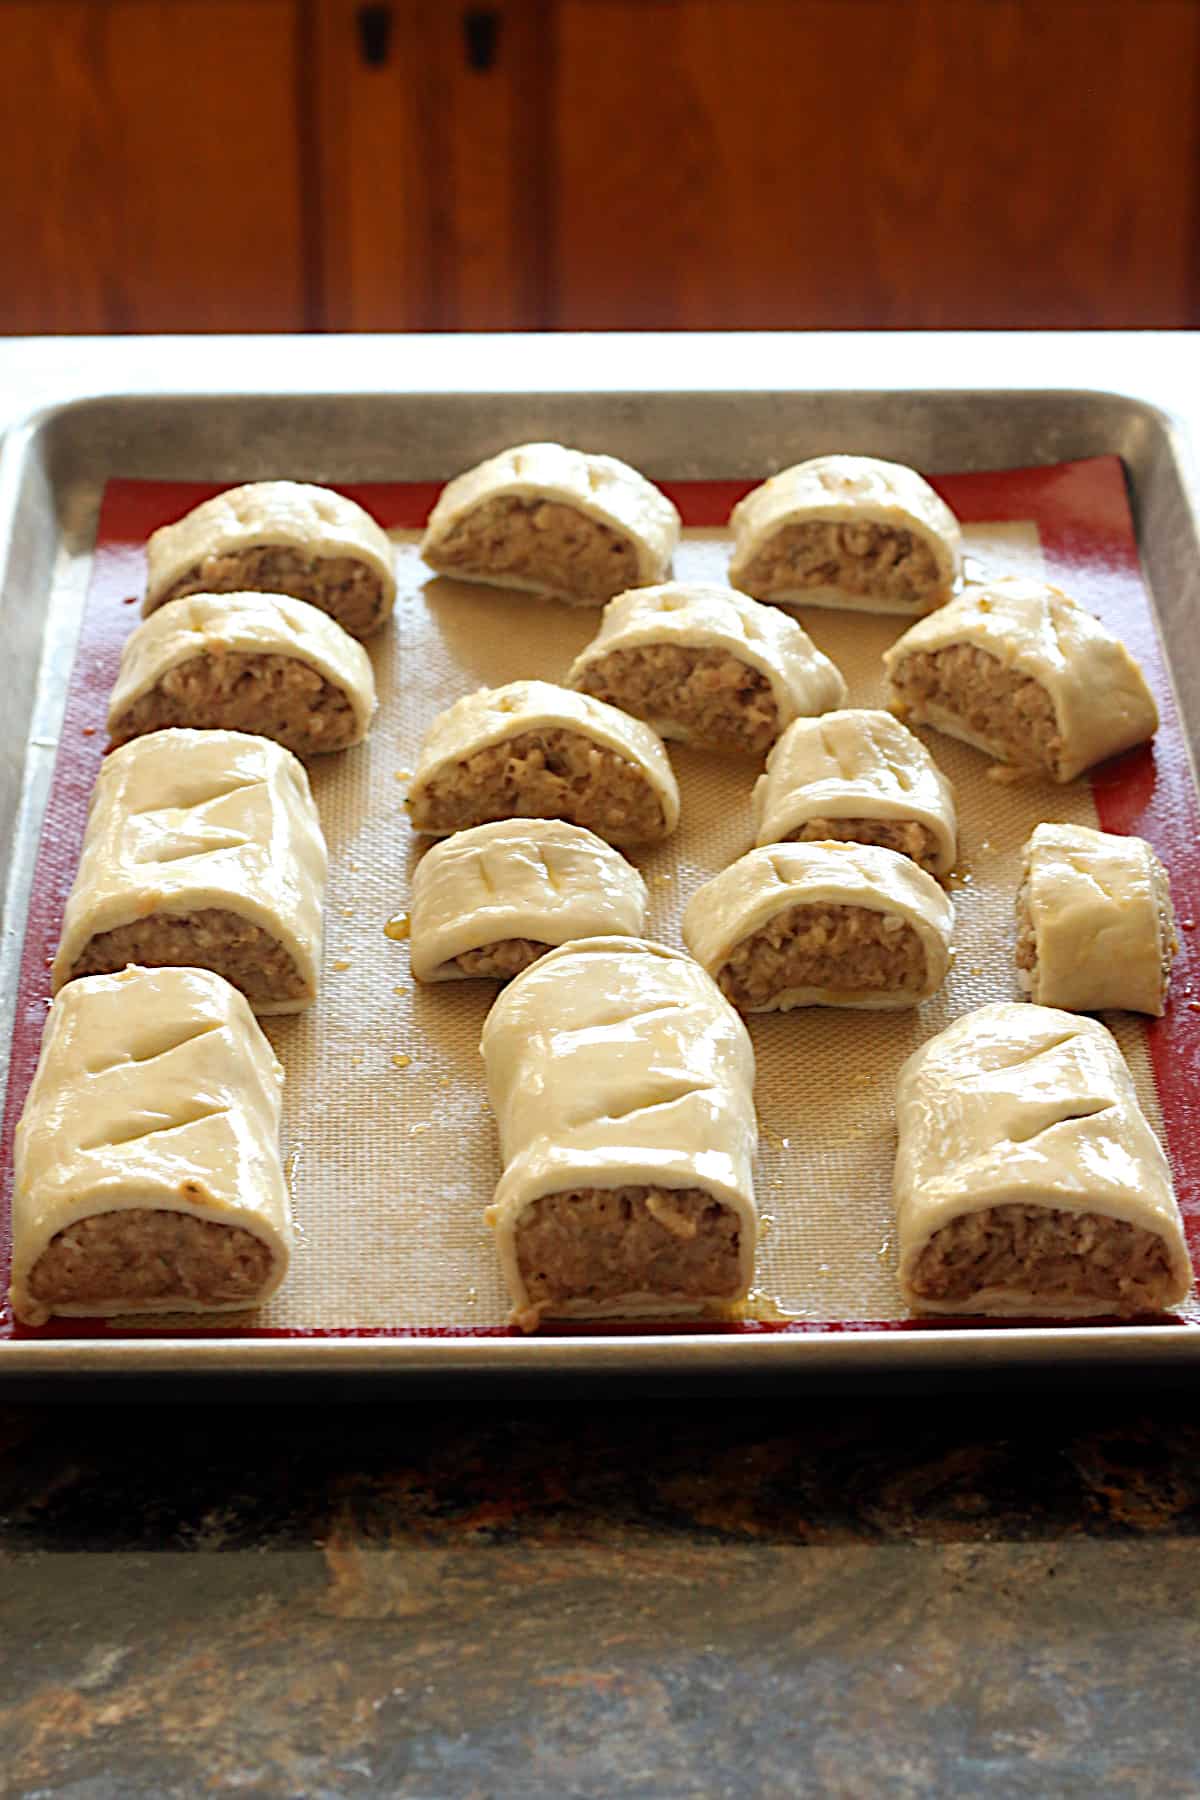 Unbaked sausage rolls on a baking sheet.